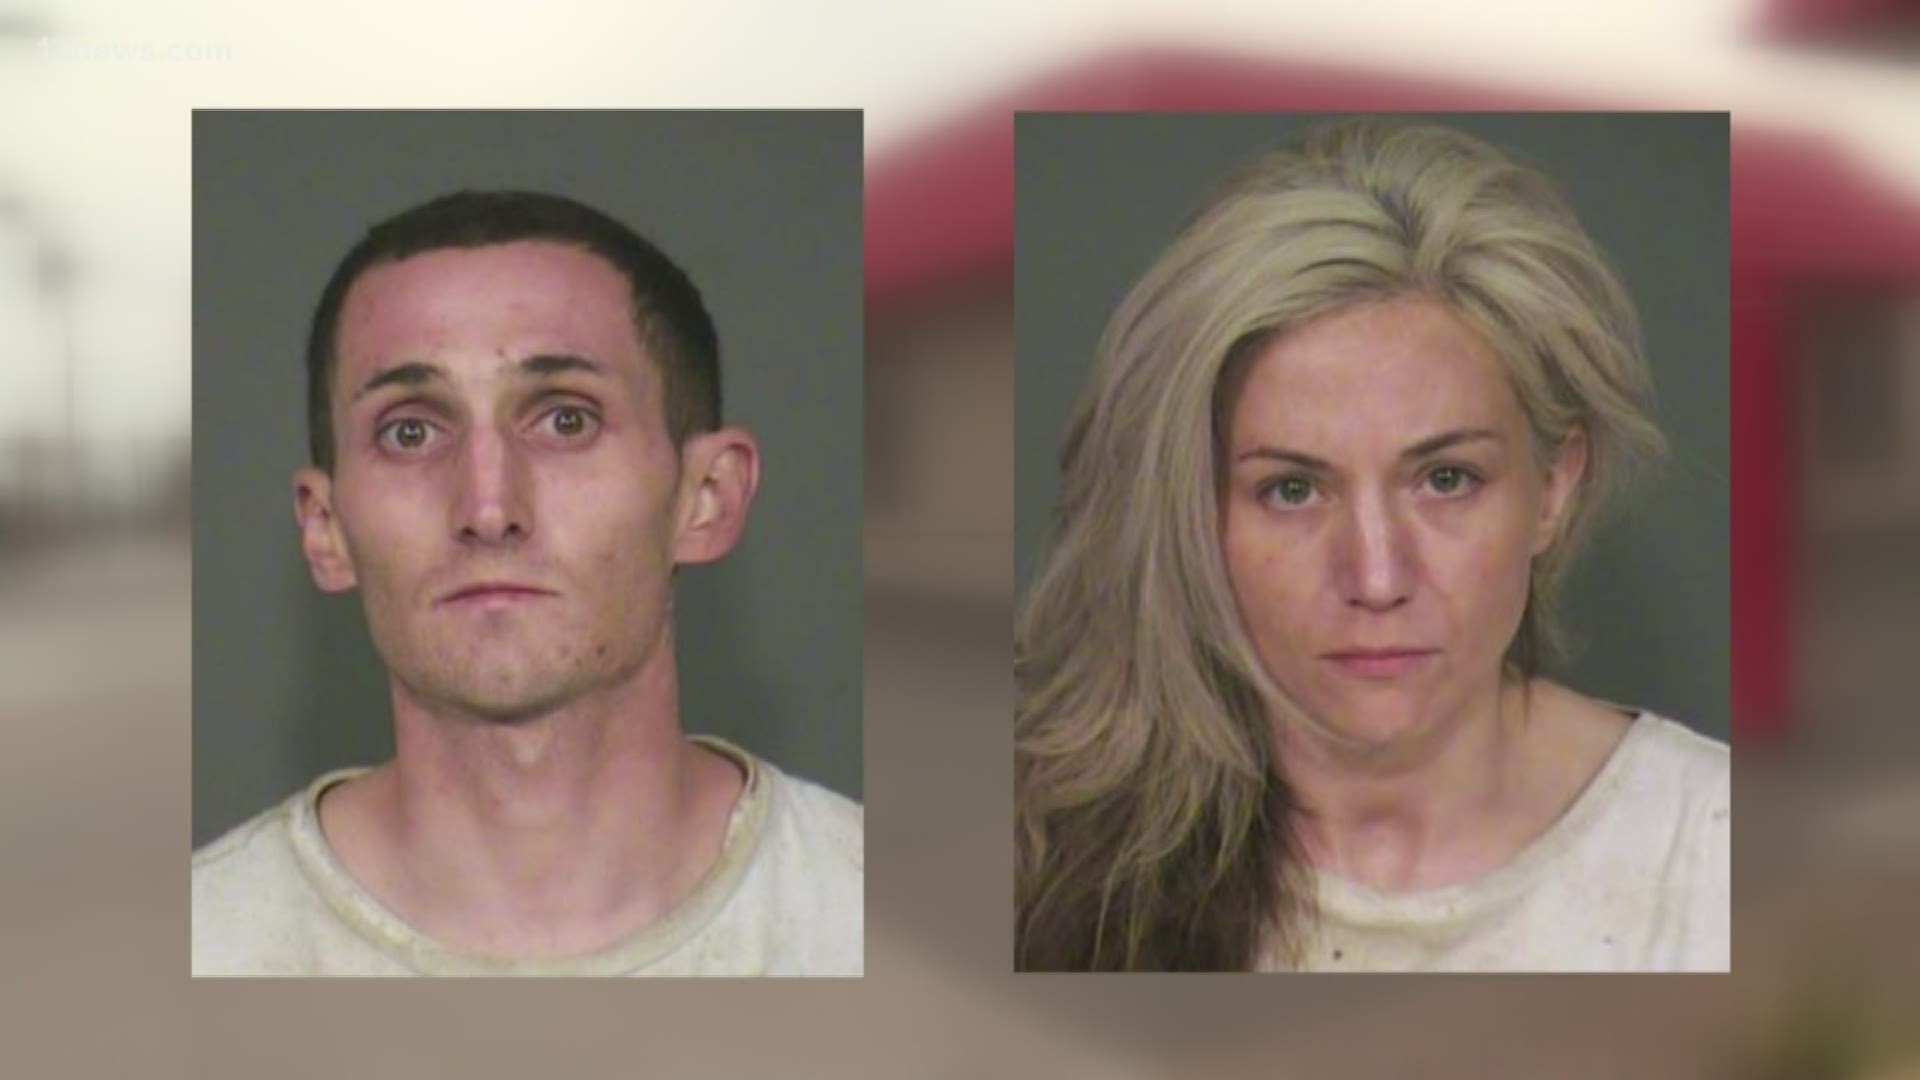 Christian Propst and Margo Barre were arrested for allegedly breaking into a Chandler storage facility and stealing $75,000 worth of guns, antiques and artwork.